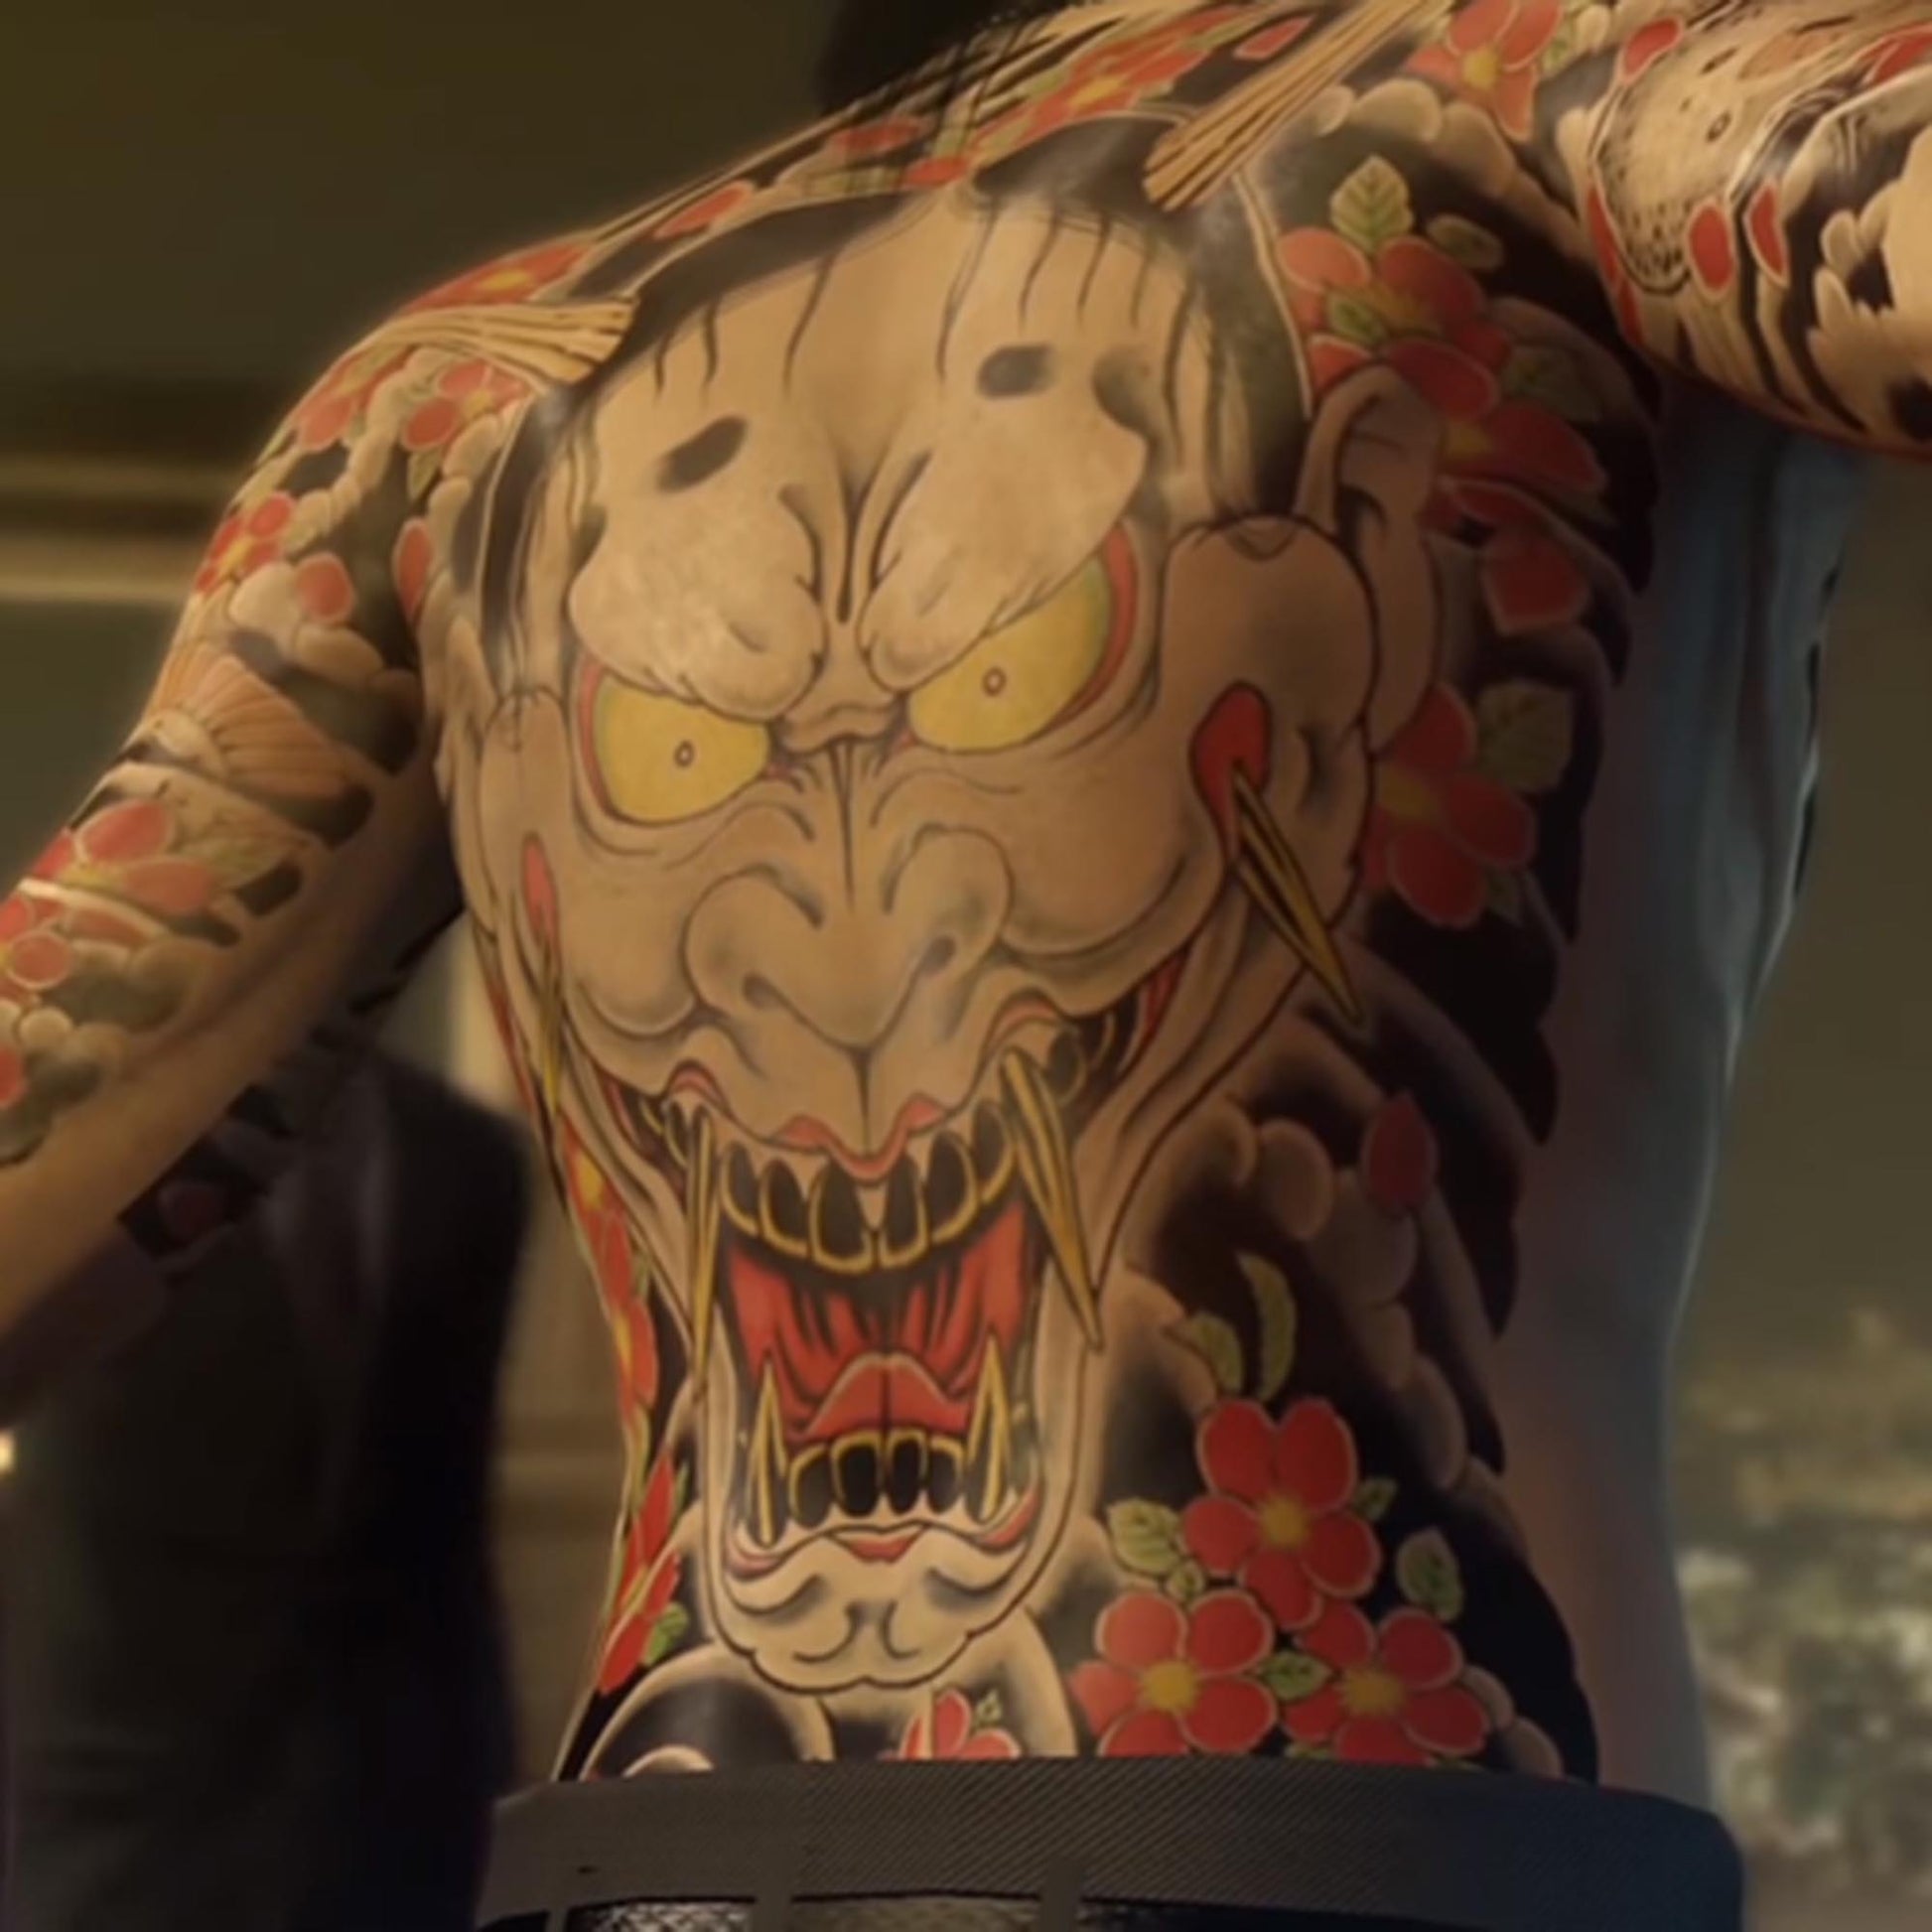 Temporary tattoos inspired by Goro Majima from Yakuza. Includes tattoos for chest and back. Available in 2 versions - chest only and full set.